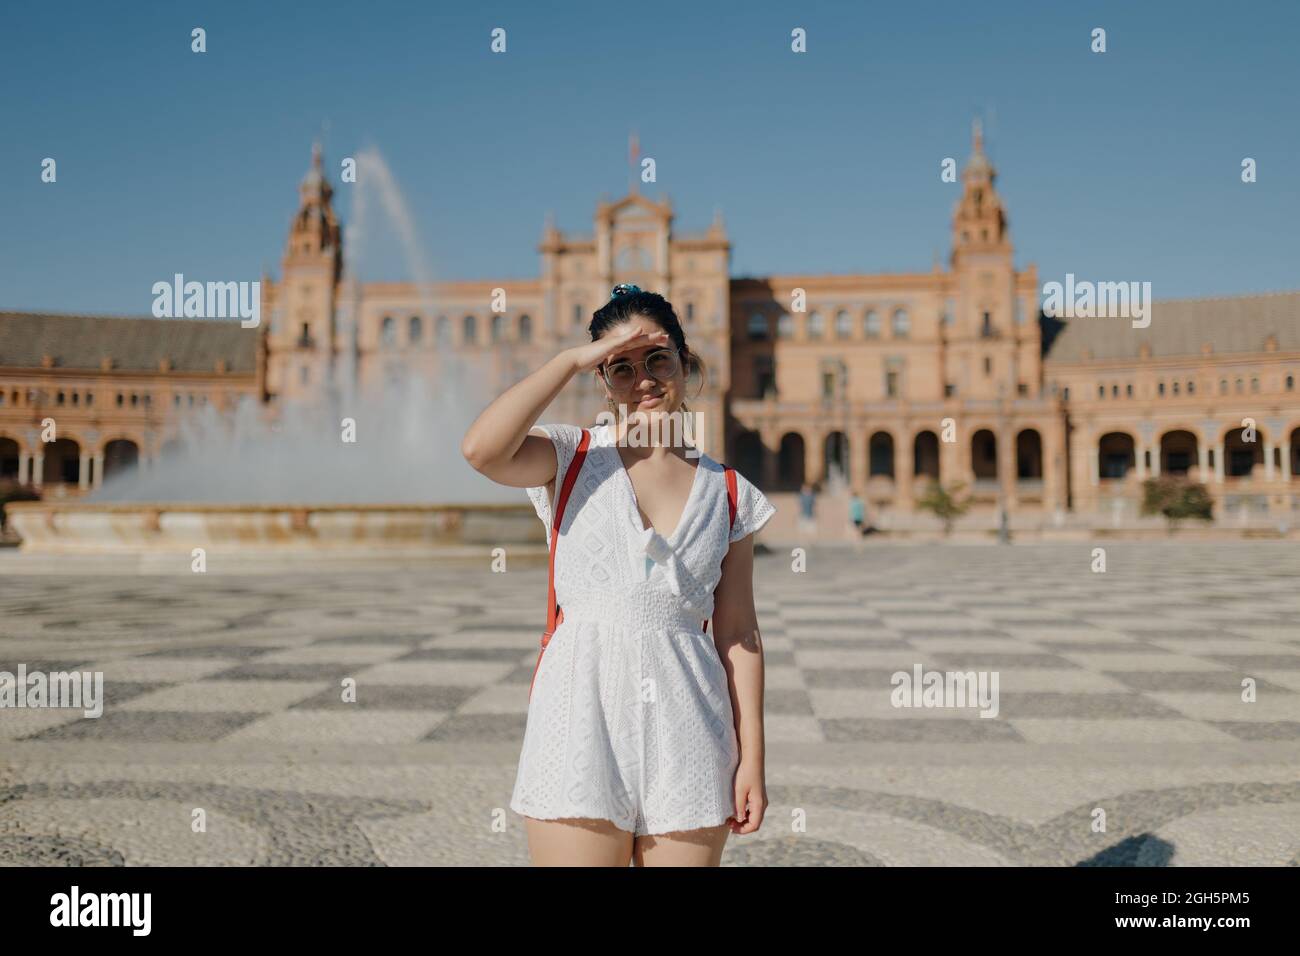 Young tourist woman with glasses wearing a white dress and red backpack is smiling and covering her eyes from the sun while standing in the Plaza de E Stock Photo